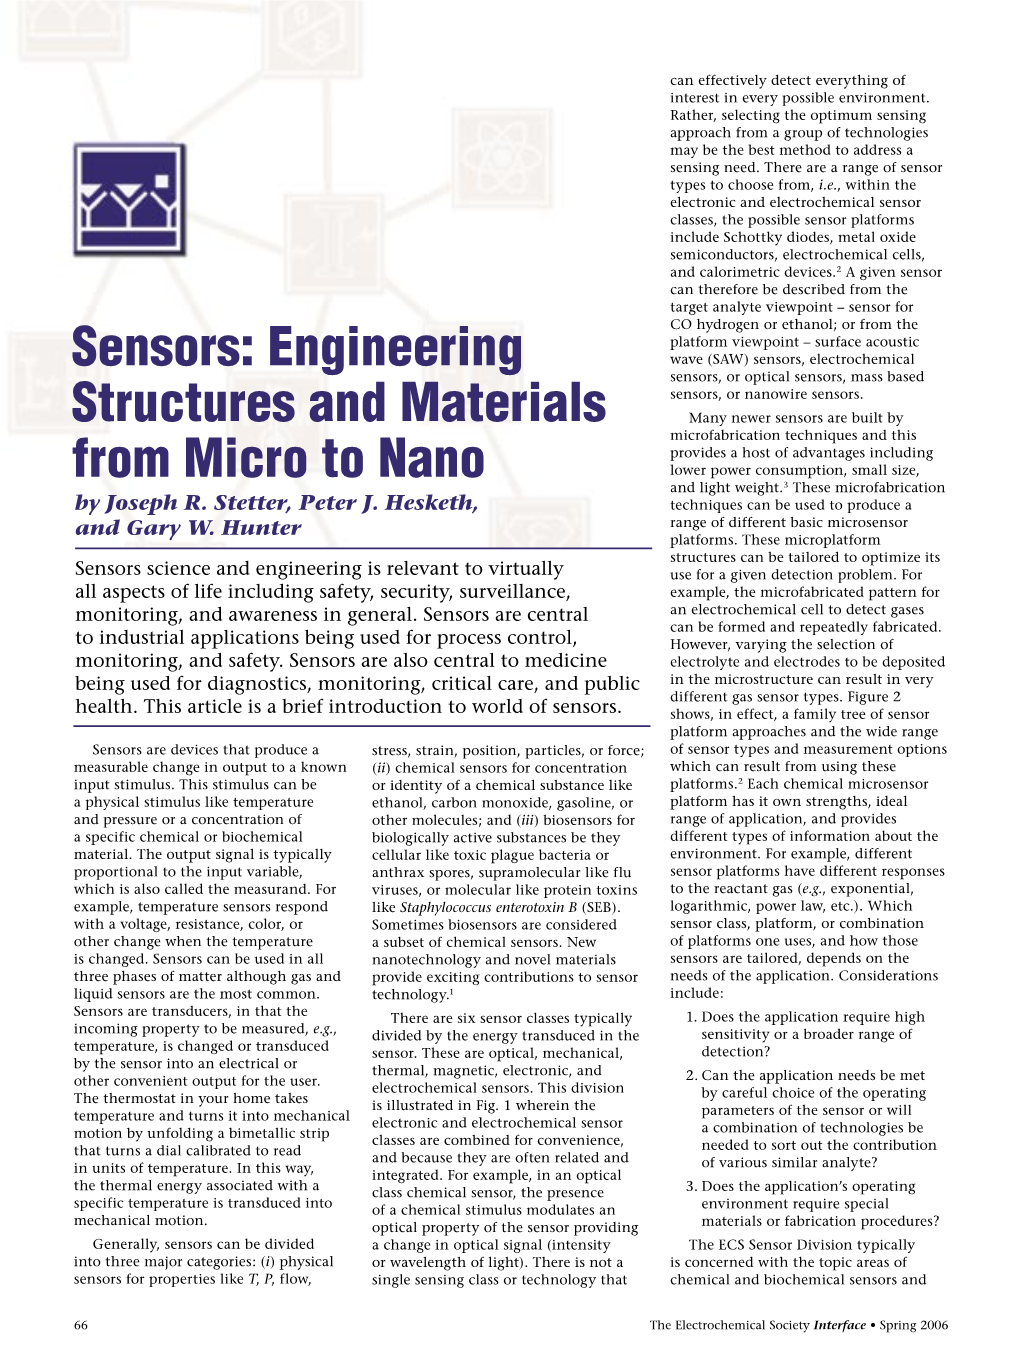 Sensors: Engineering Structures and Materials from Micro to Nano